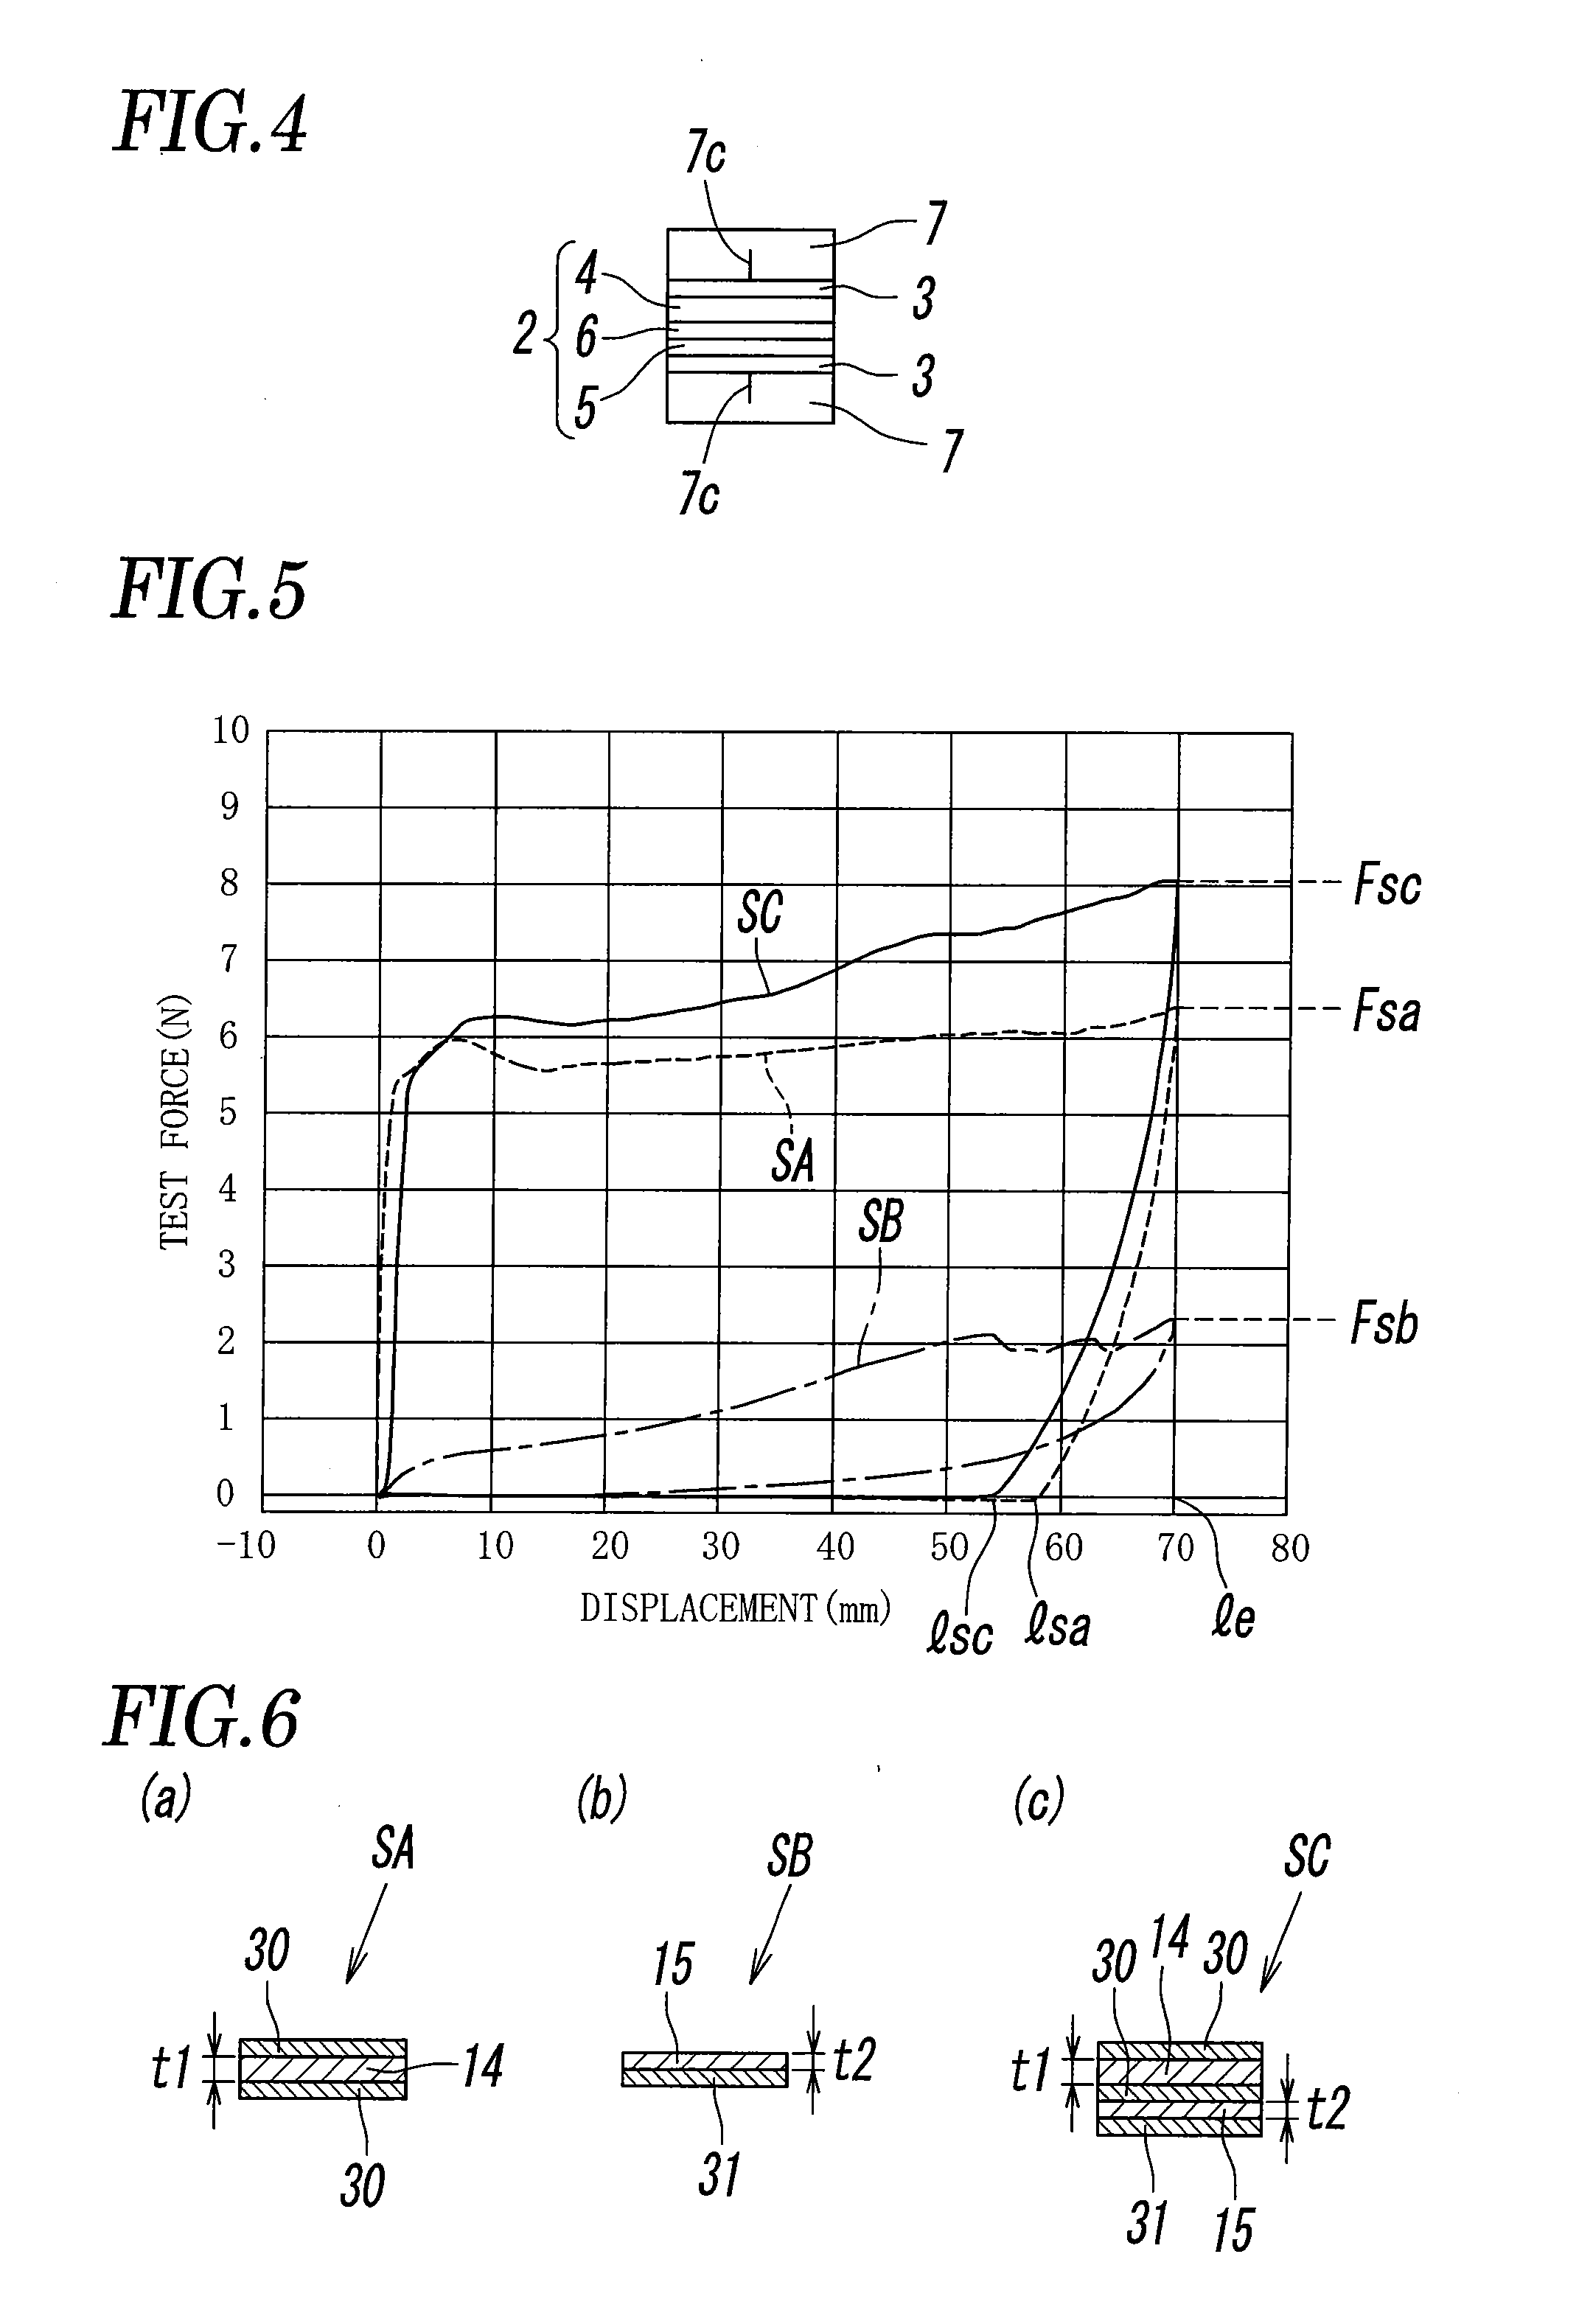 Double eyelid formation tape, method for manufacturing same, and method for forming double eyelid using double eyelid formation tape